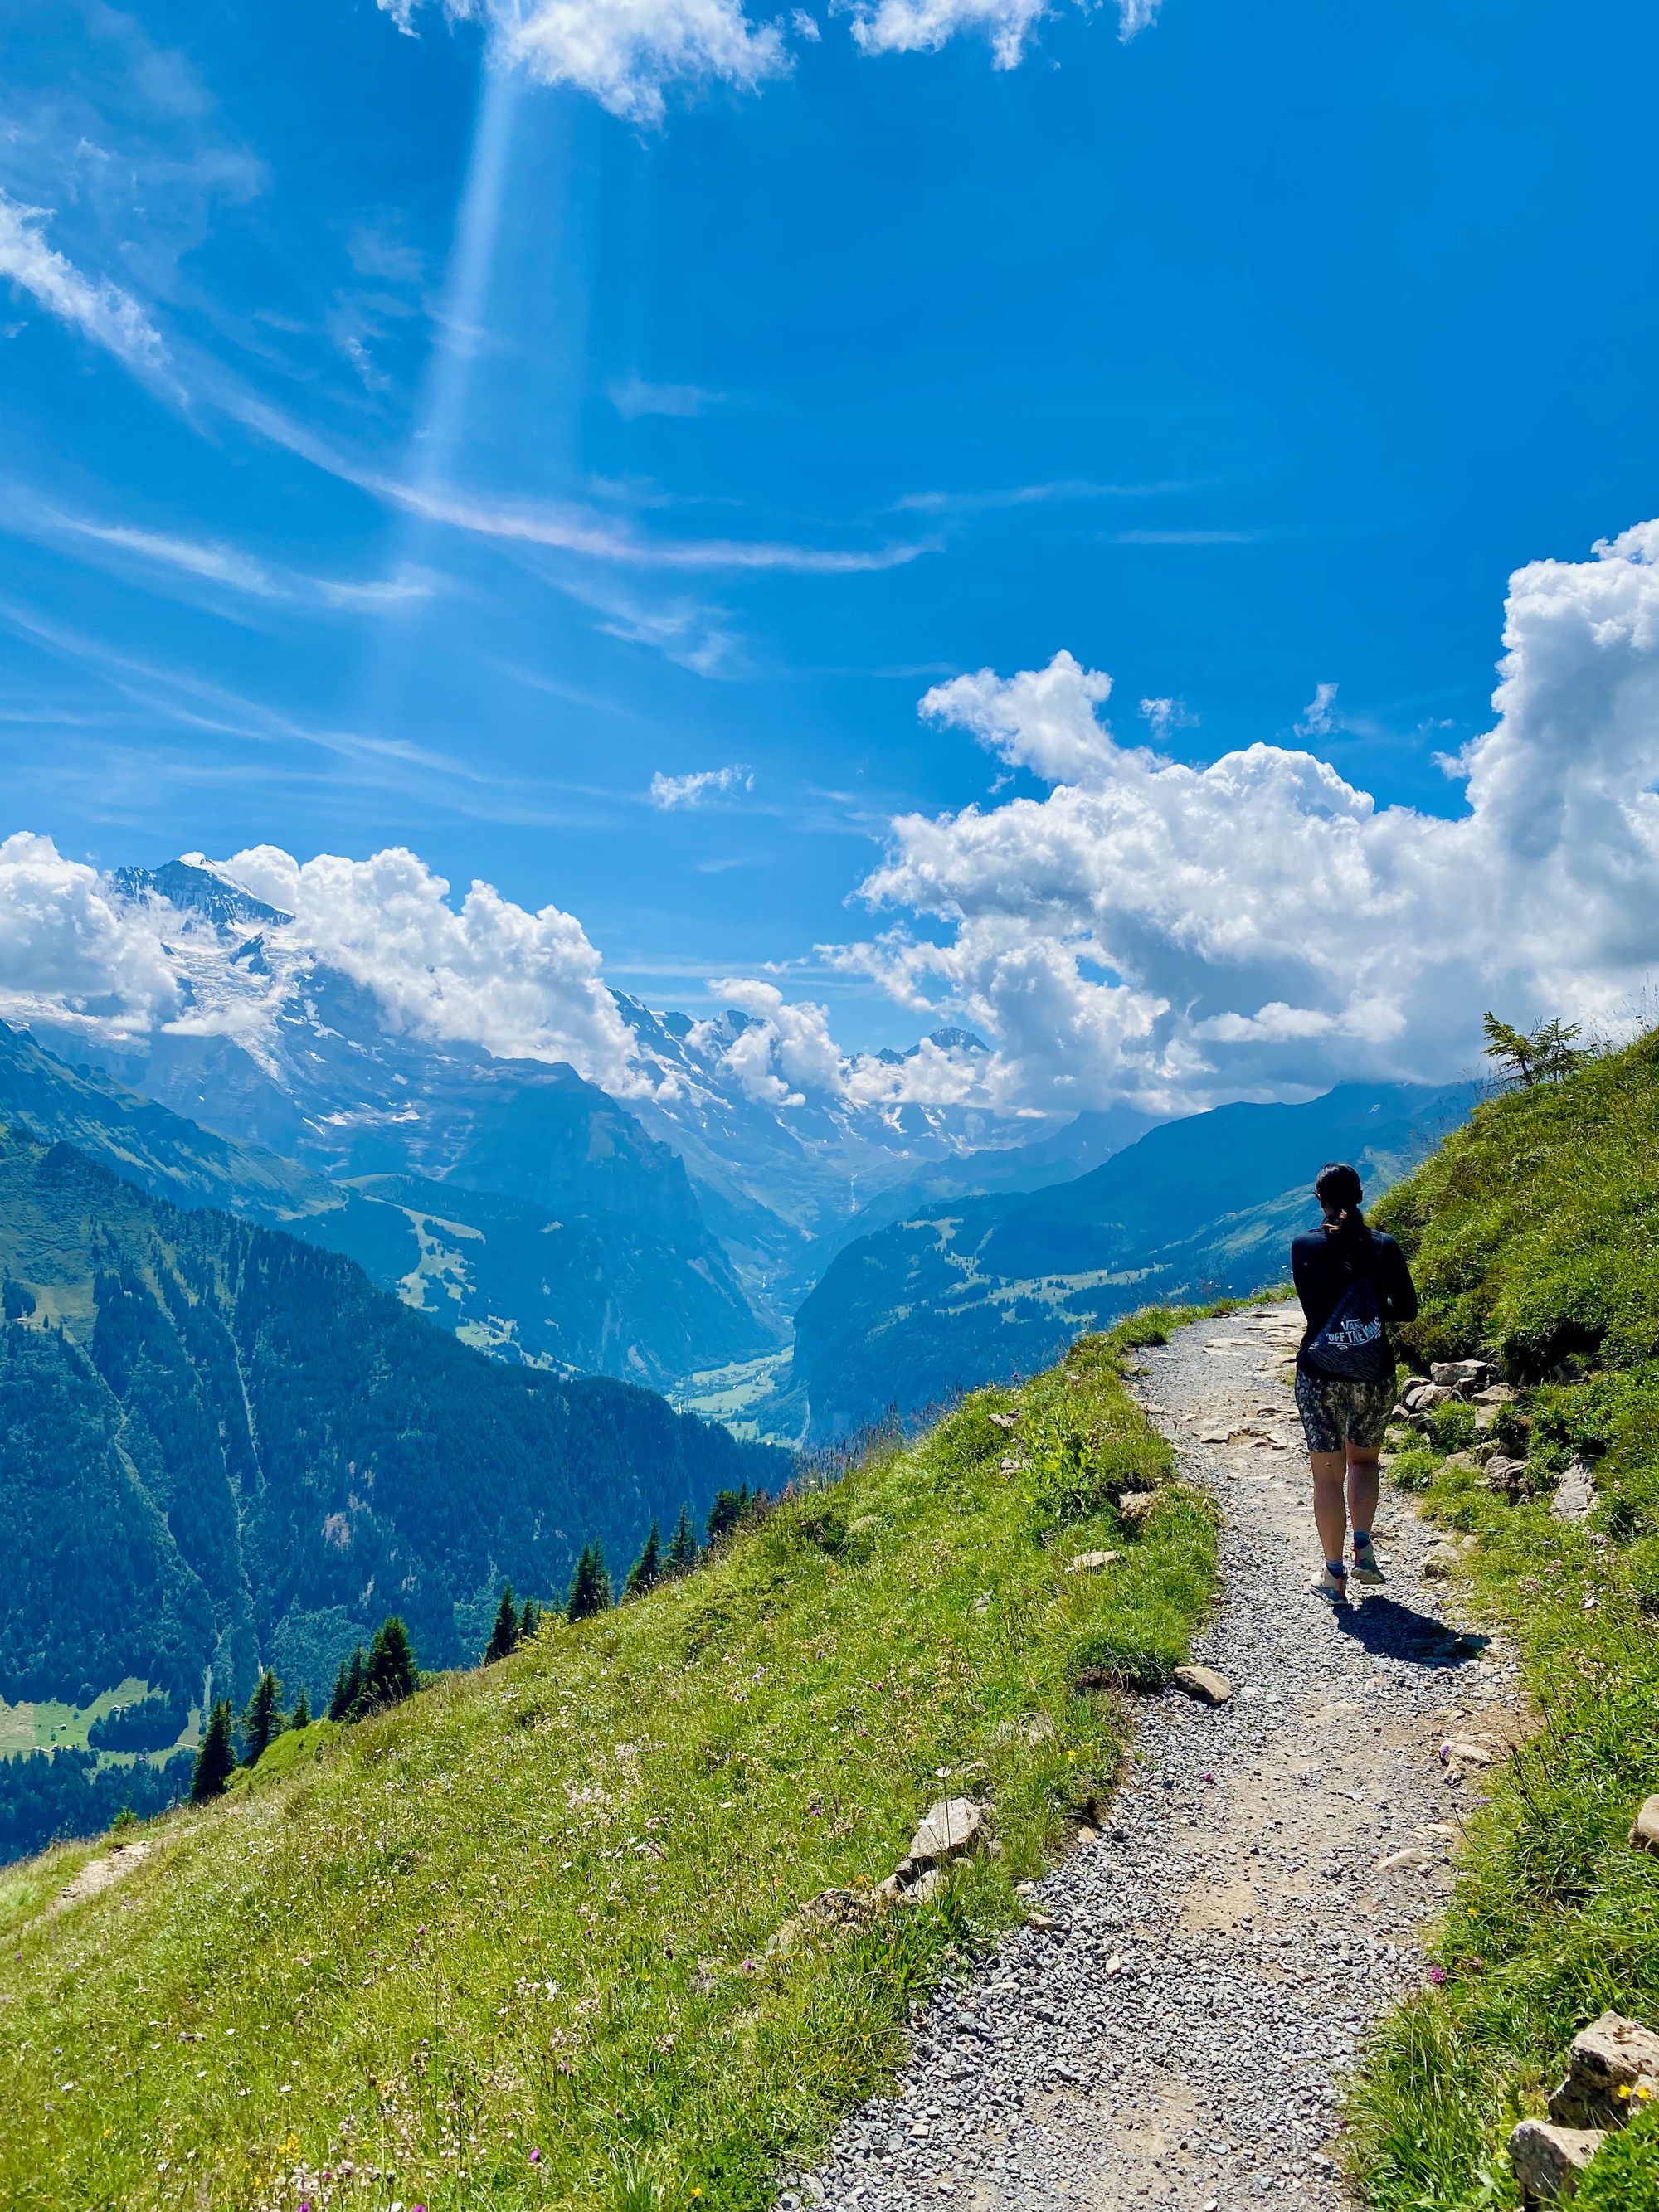 Silvia on a trail on the swiss mountains with Lauterbrunnen valley in the background